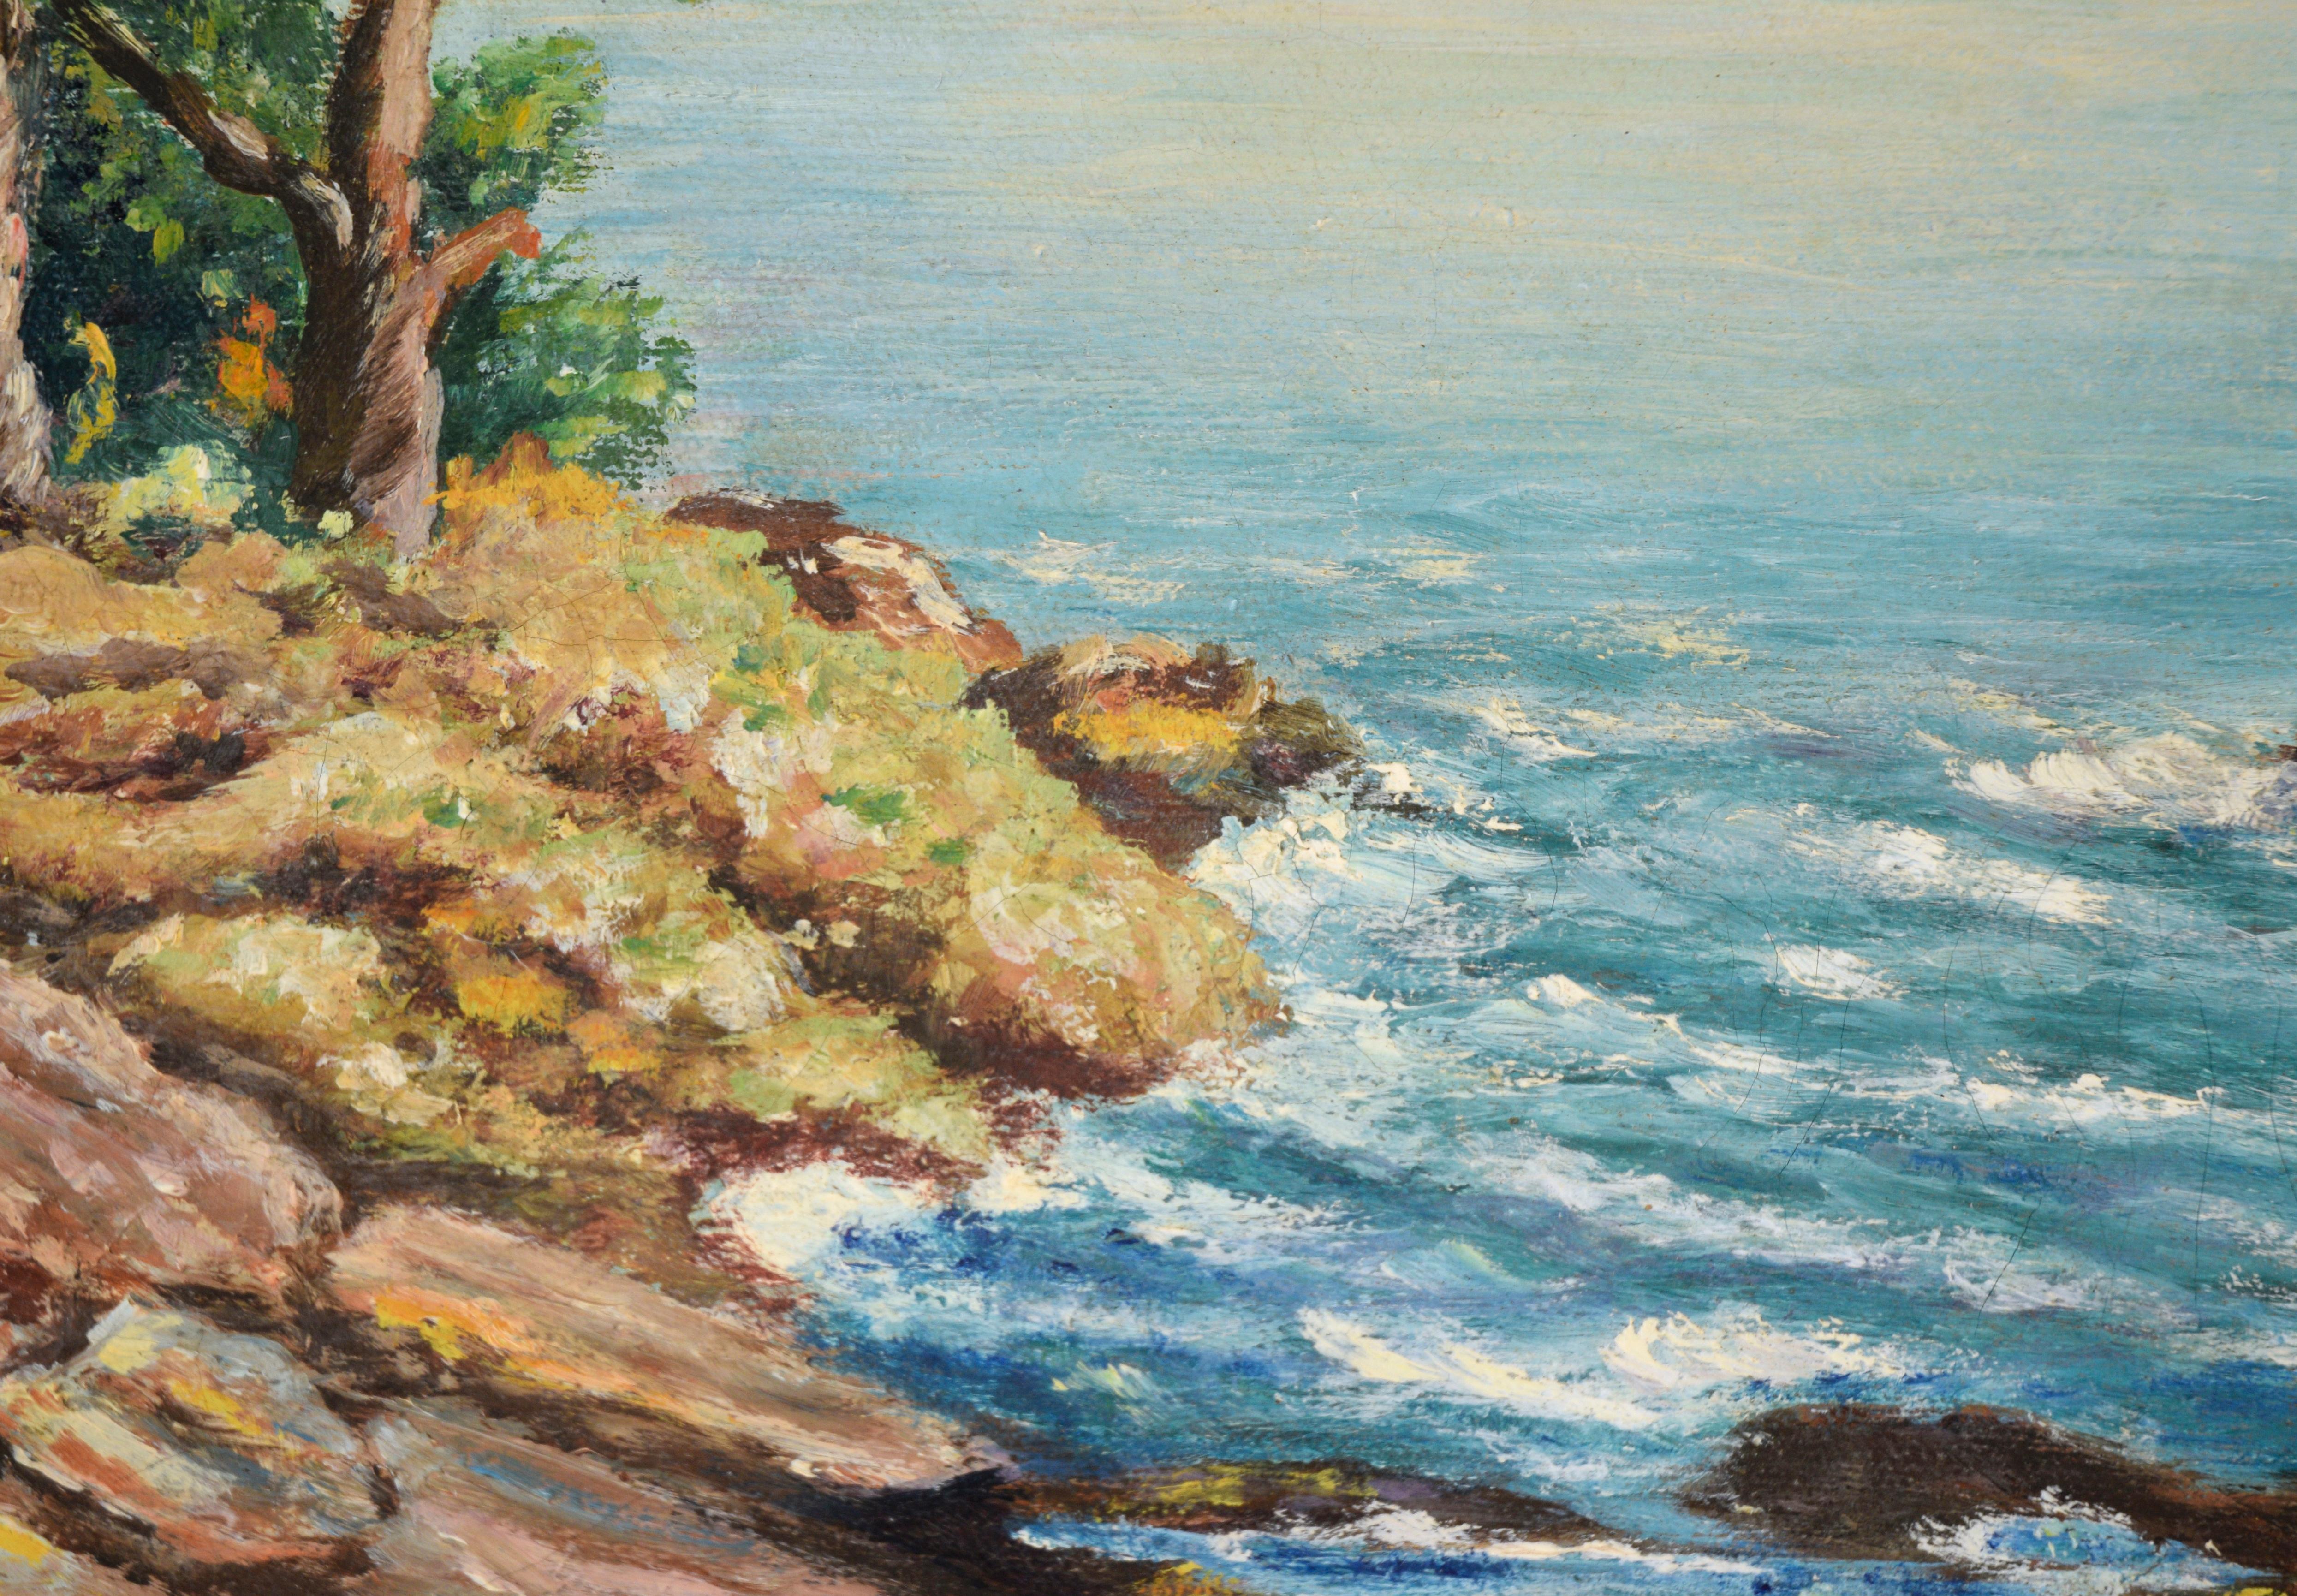 Monterey Cypress - Carmel by the Sea California Seascape in Oil on Canvas For Sale 1